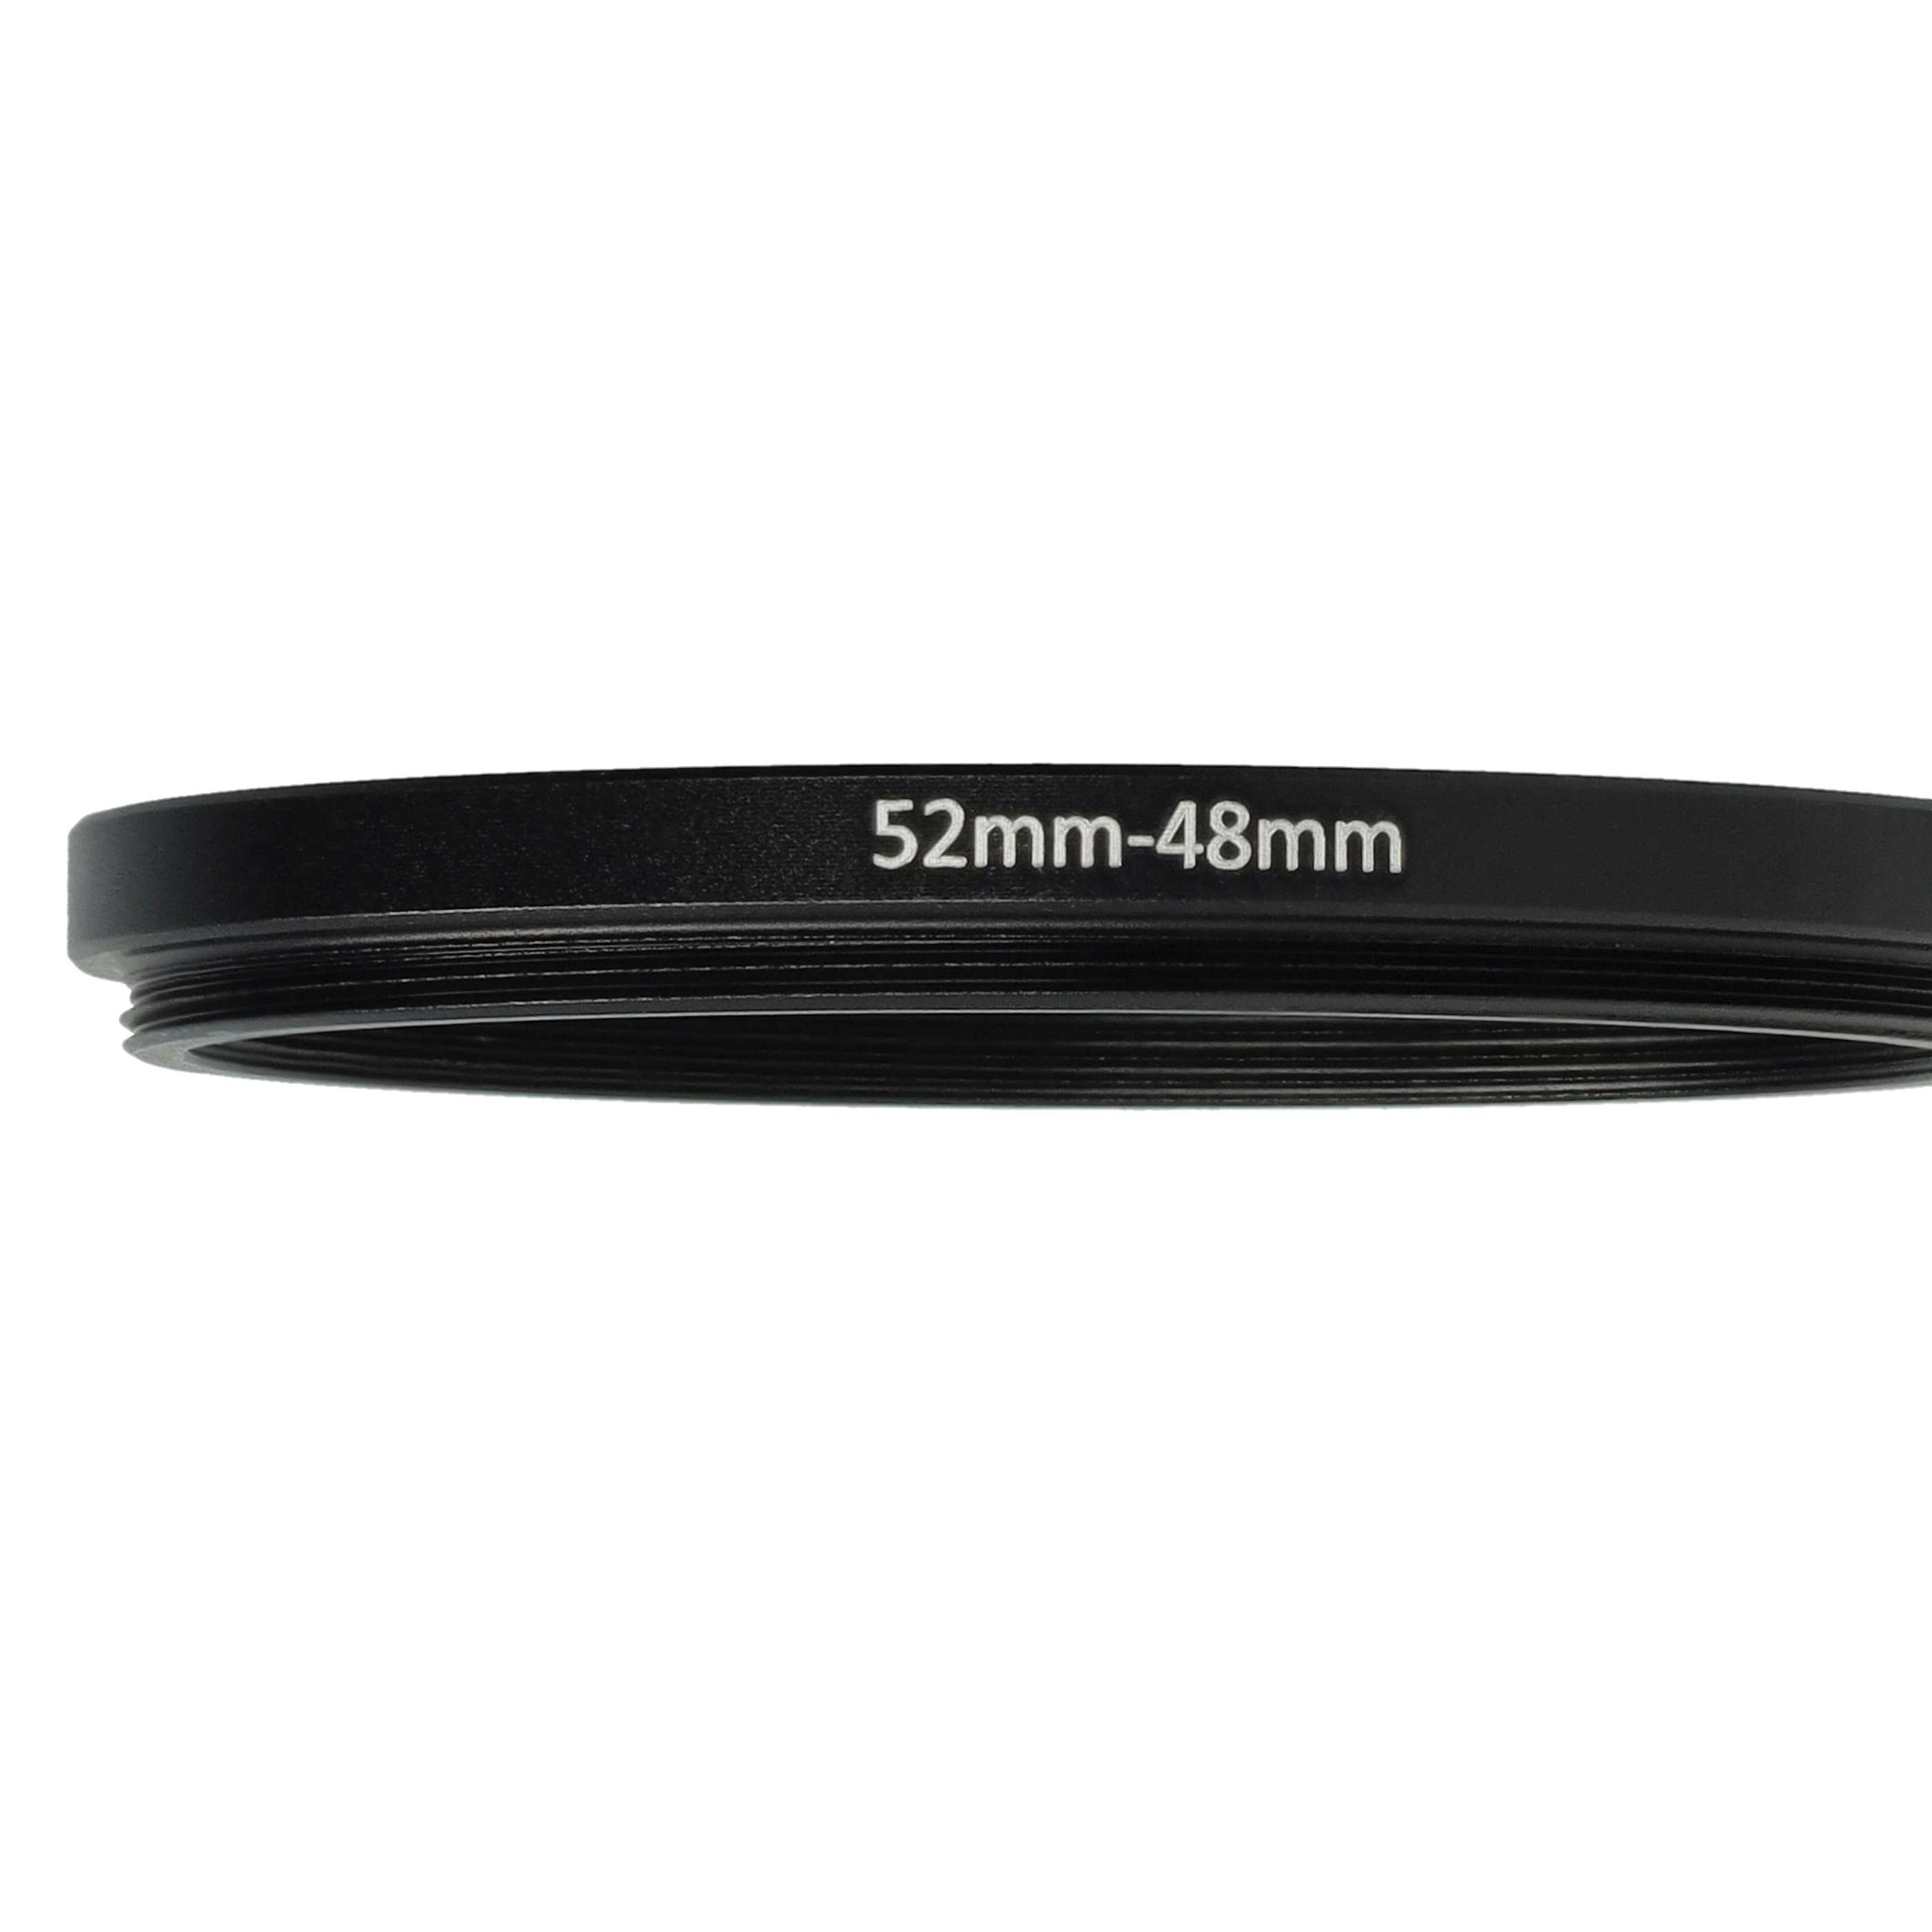 Step-Down Ring Adapter from 52 mm to 48 mm suitable for Camera Lens - Filter Adapter, metal